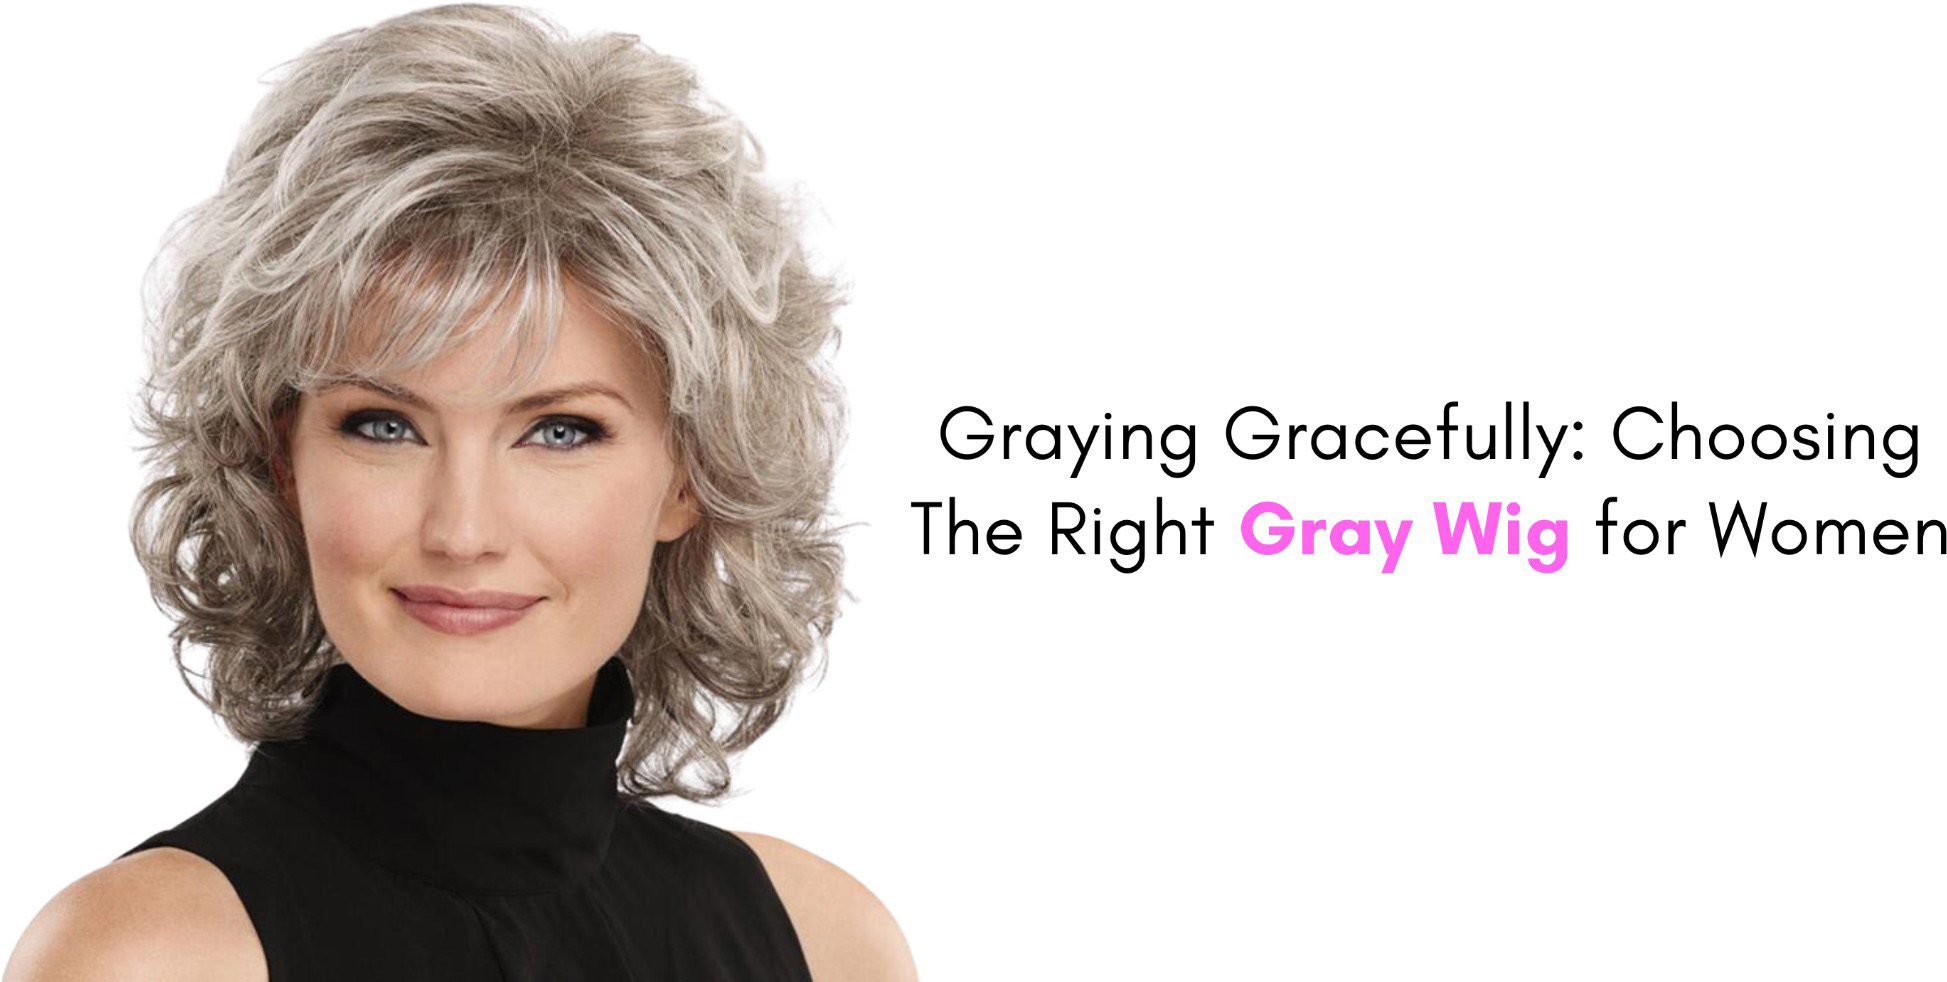 Graying Gracefully: Choosing The Right Gray Wig for Women